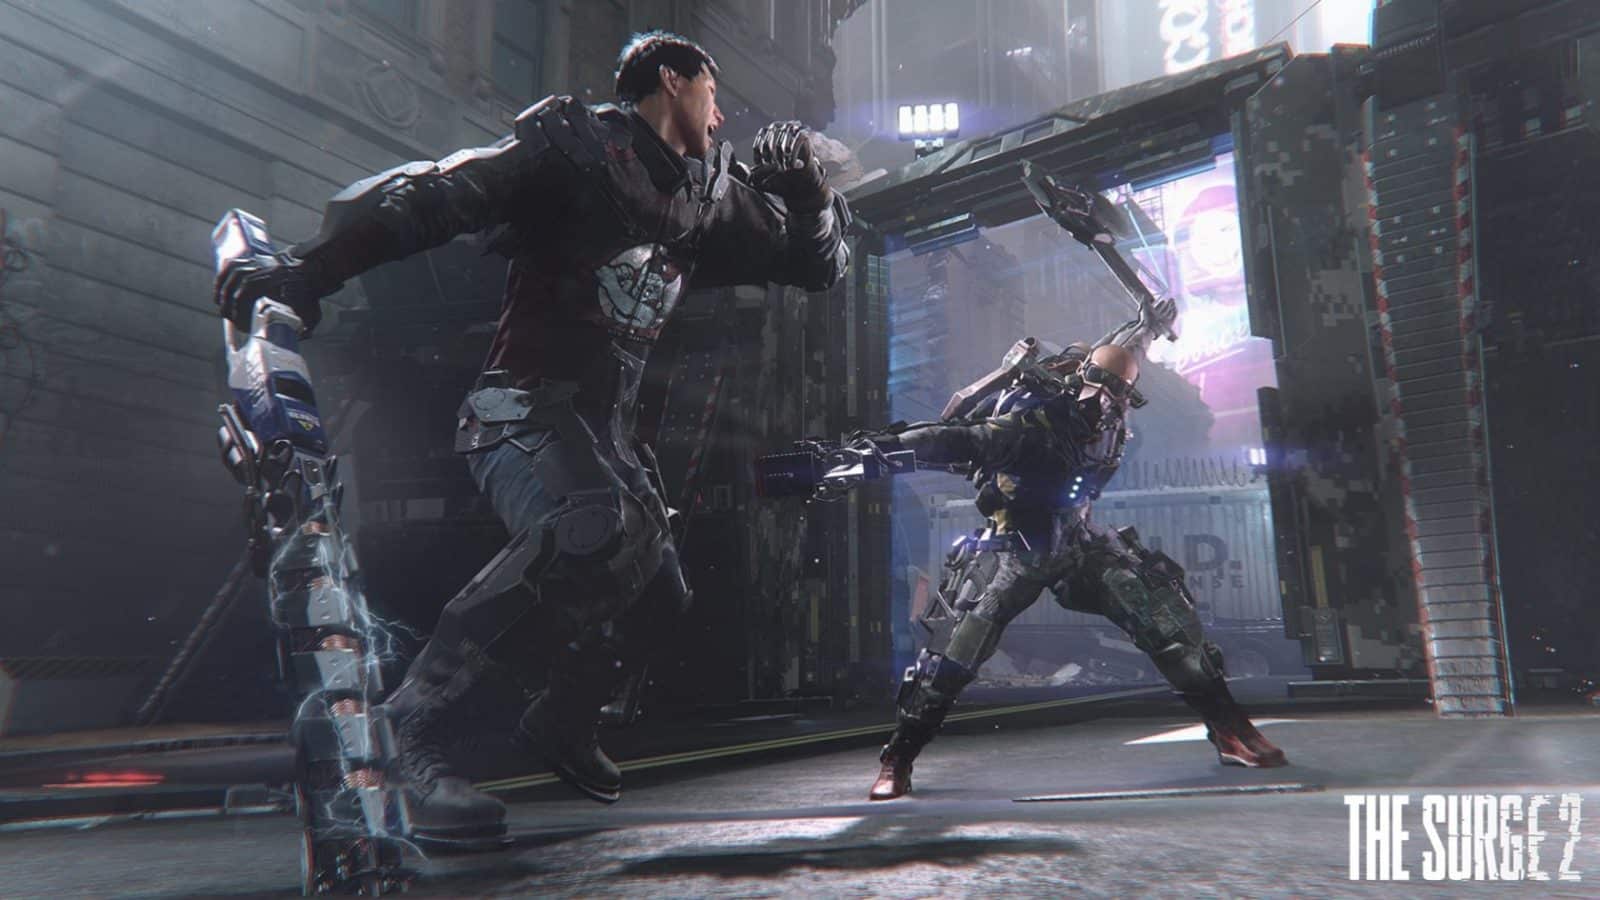 The Surge 2 Limited Edition Screenshot